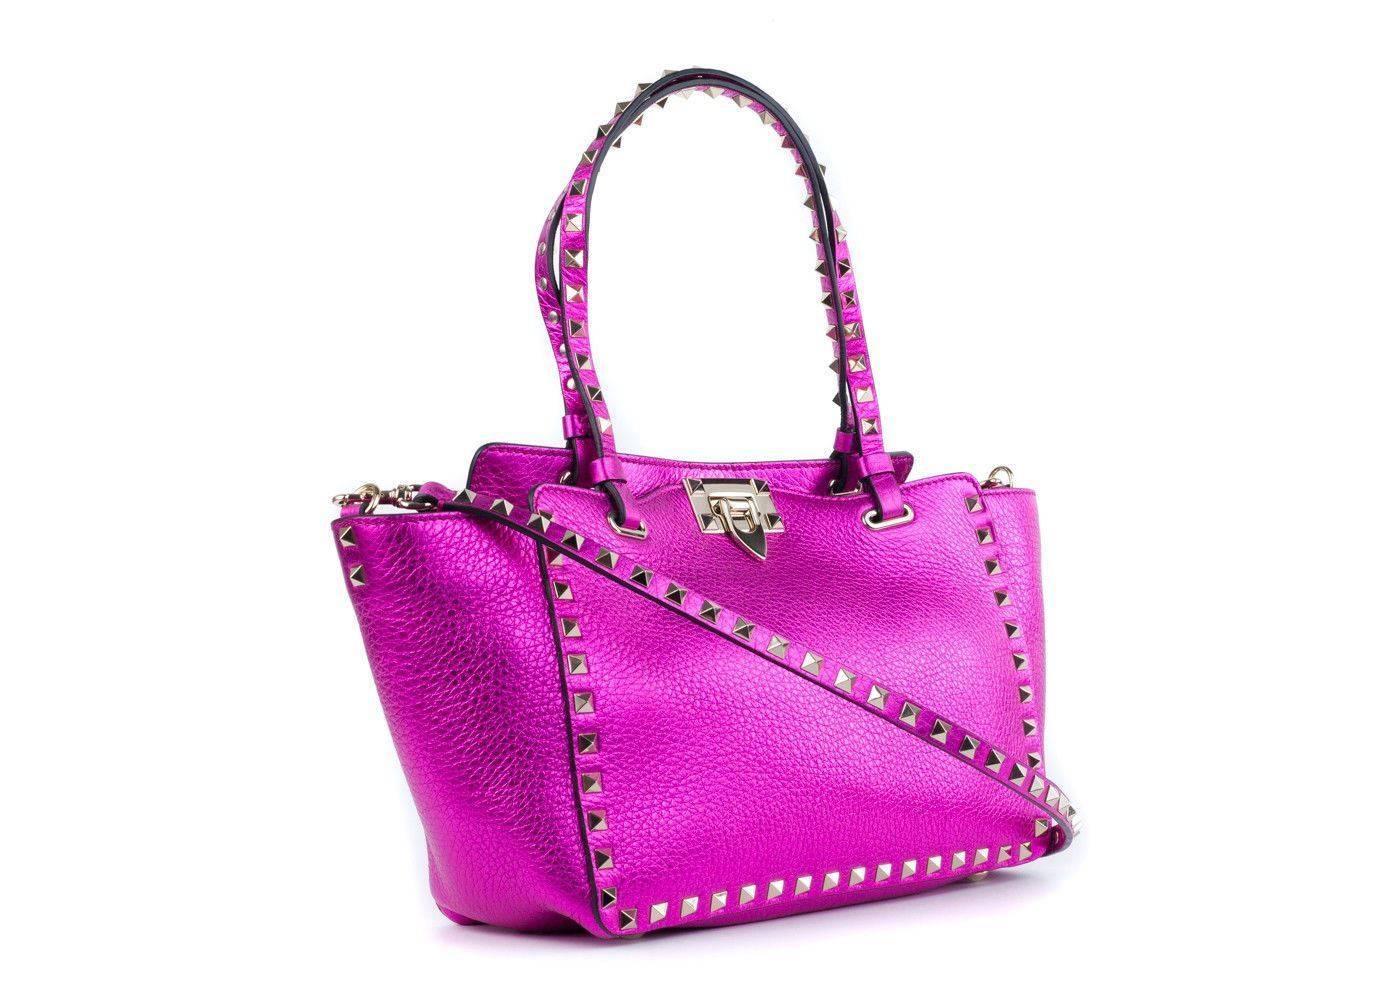 Brand New Valentino Tote Bag
Original Box & Dust Bag Included
Retails in Stores & Online for $2295
Considered as a size Small

The iconic rockstud trapeze tote from valentino takes on a dark pink hue for the new collection, adding glamorous